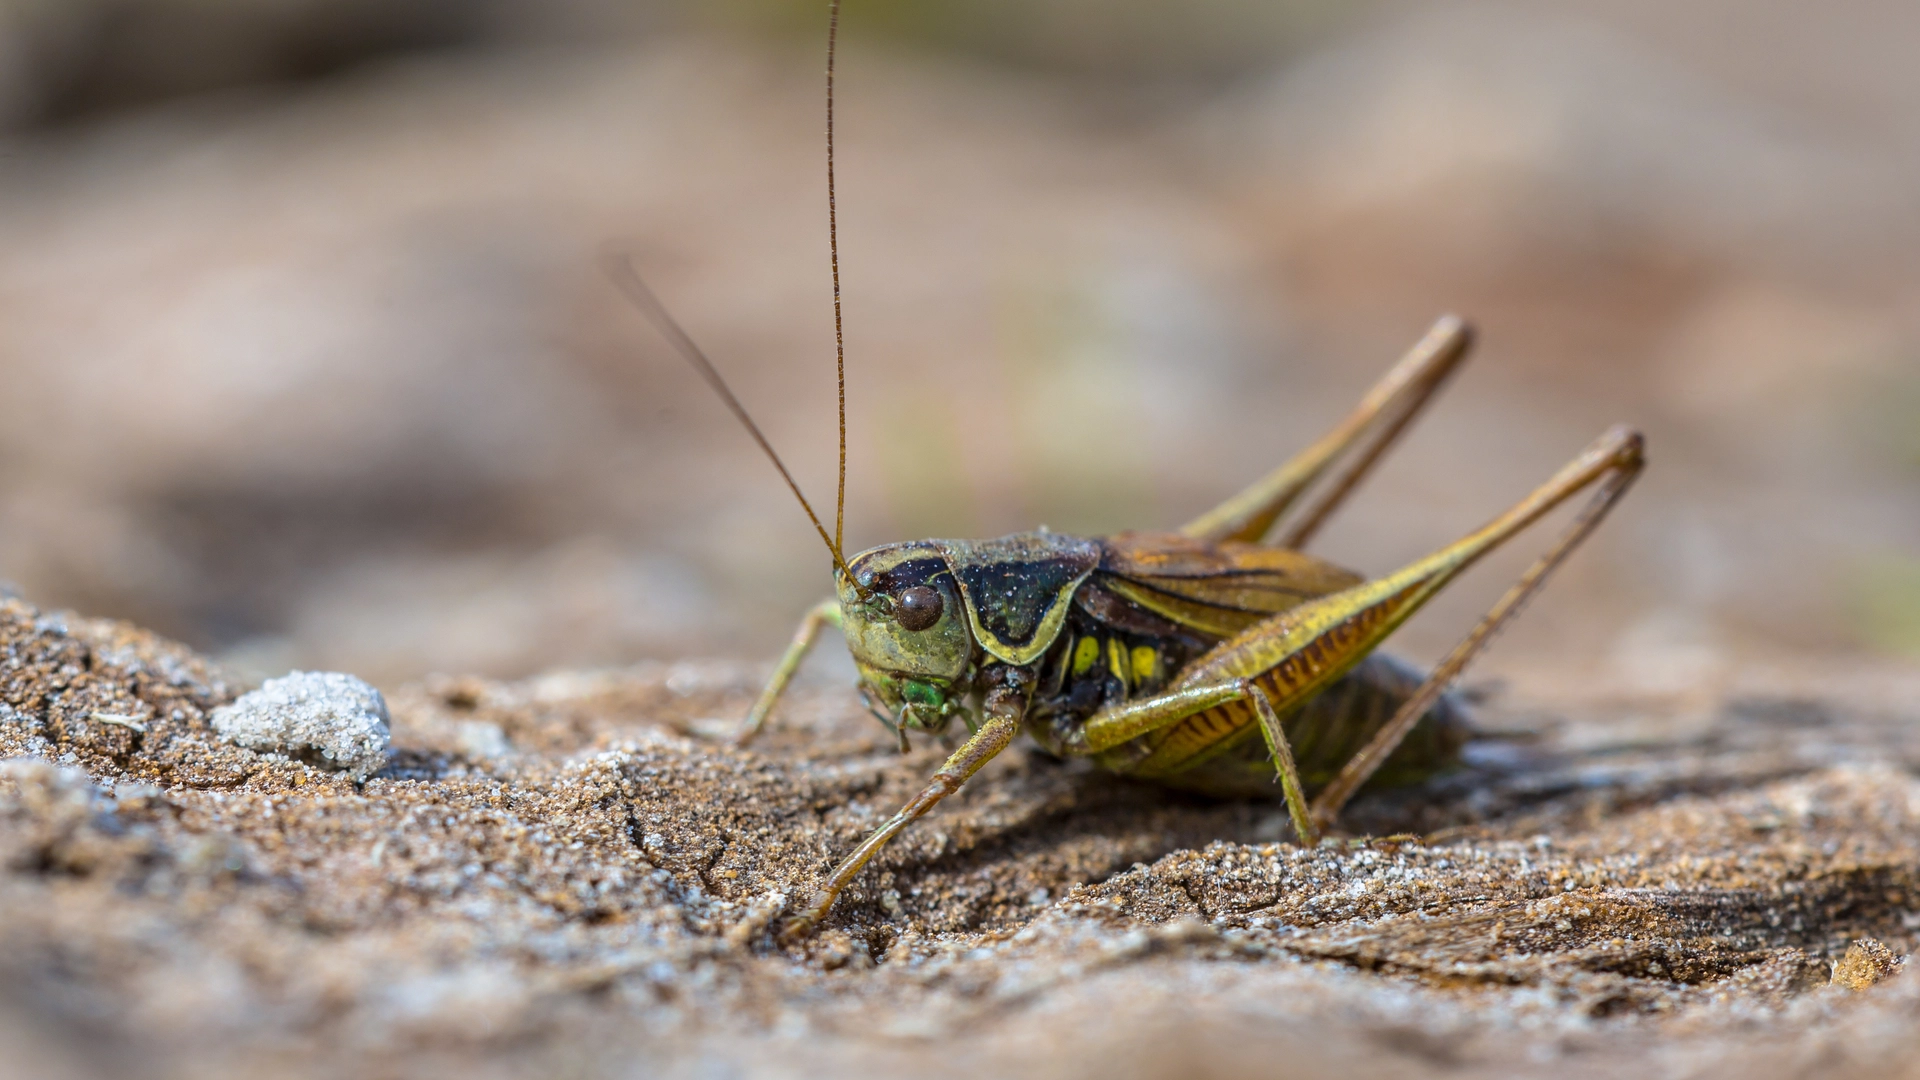 crickets in basement: A cricket on a rough ground